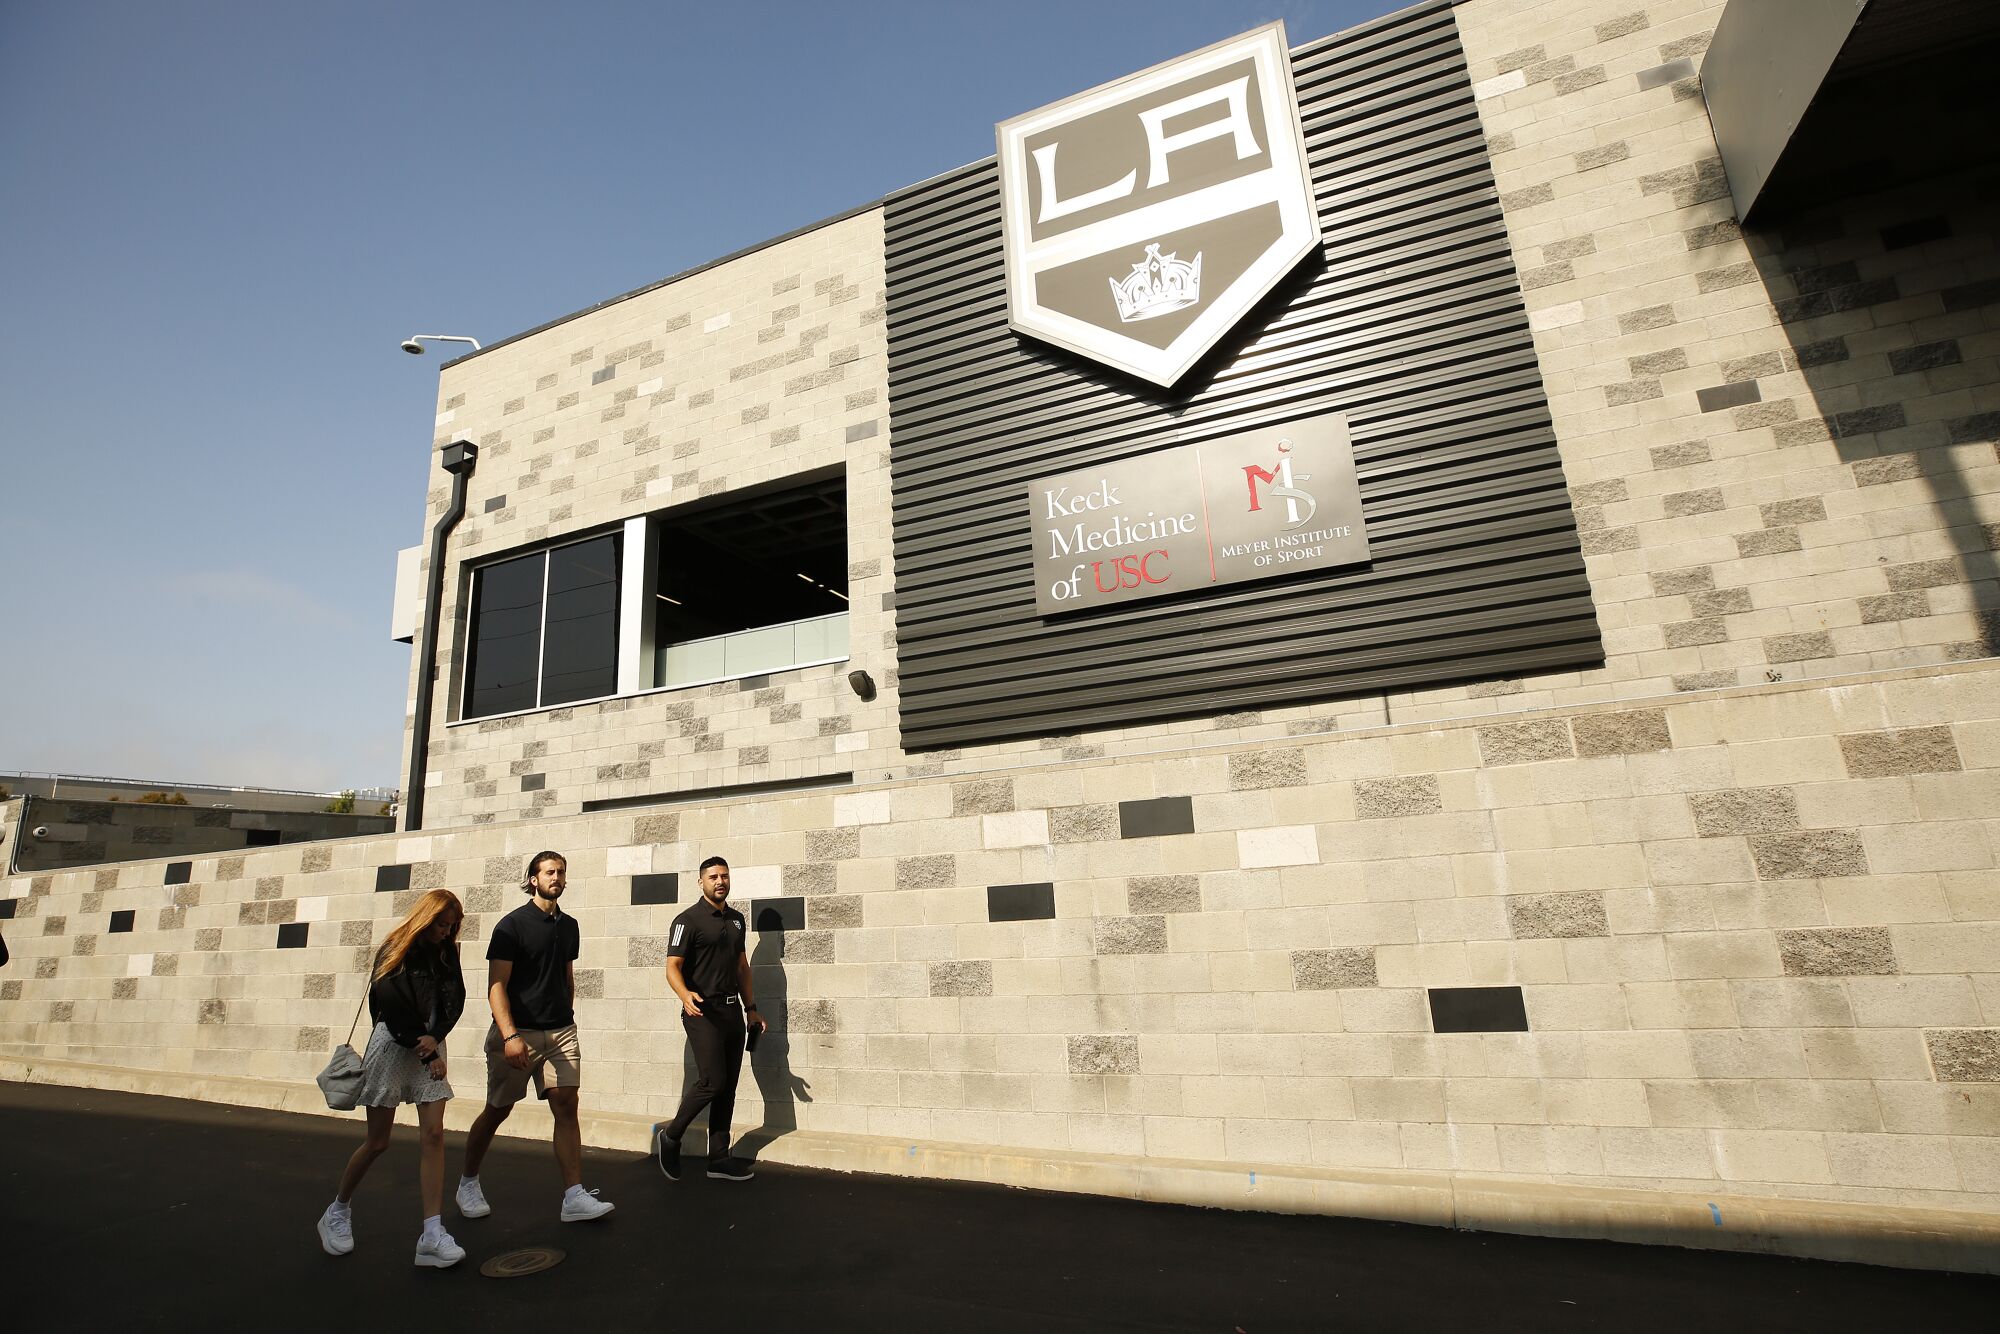 New L.A. Kings forward Phillip Danault and his wife, Marie, get a tour of the team's practice facility